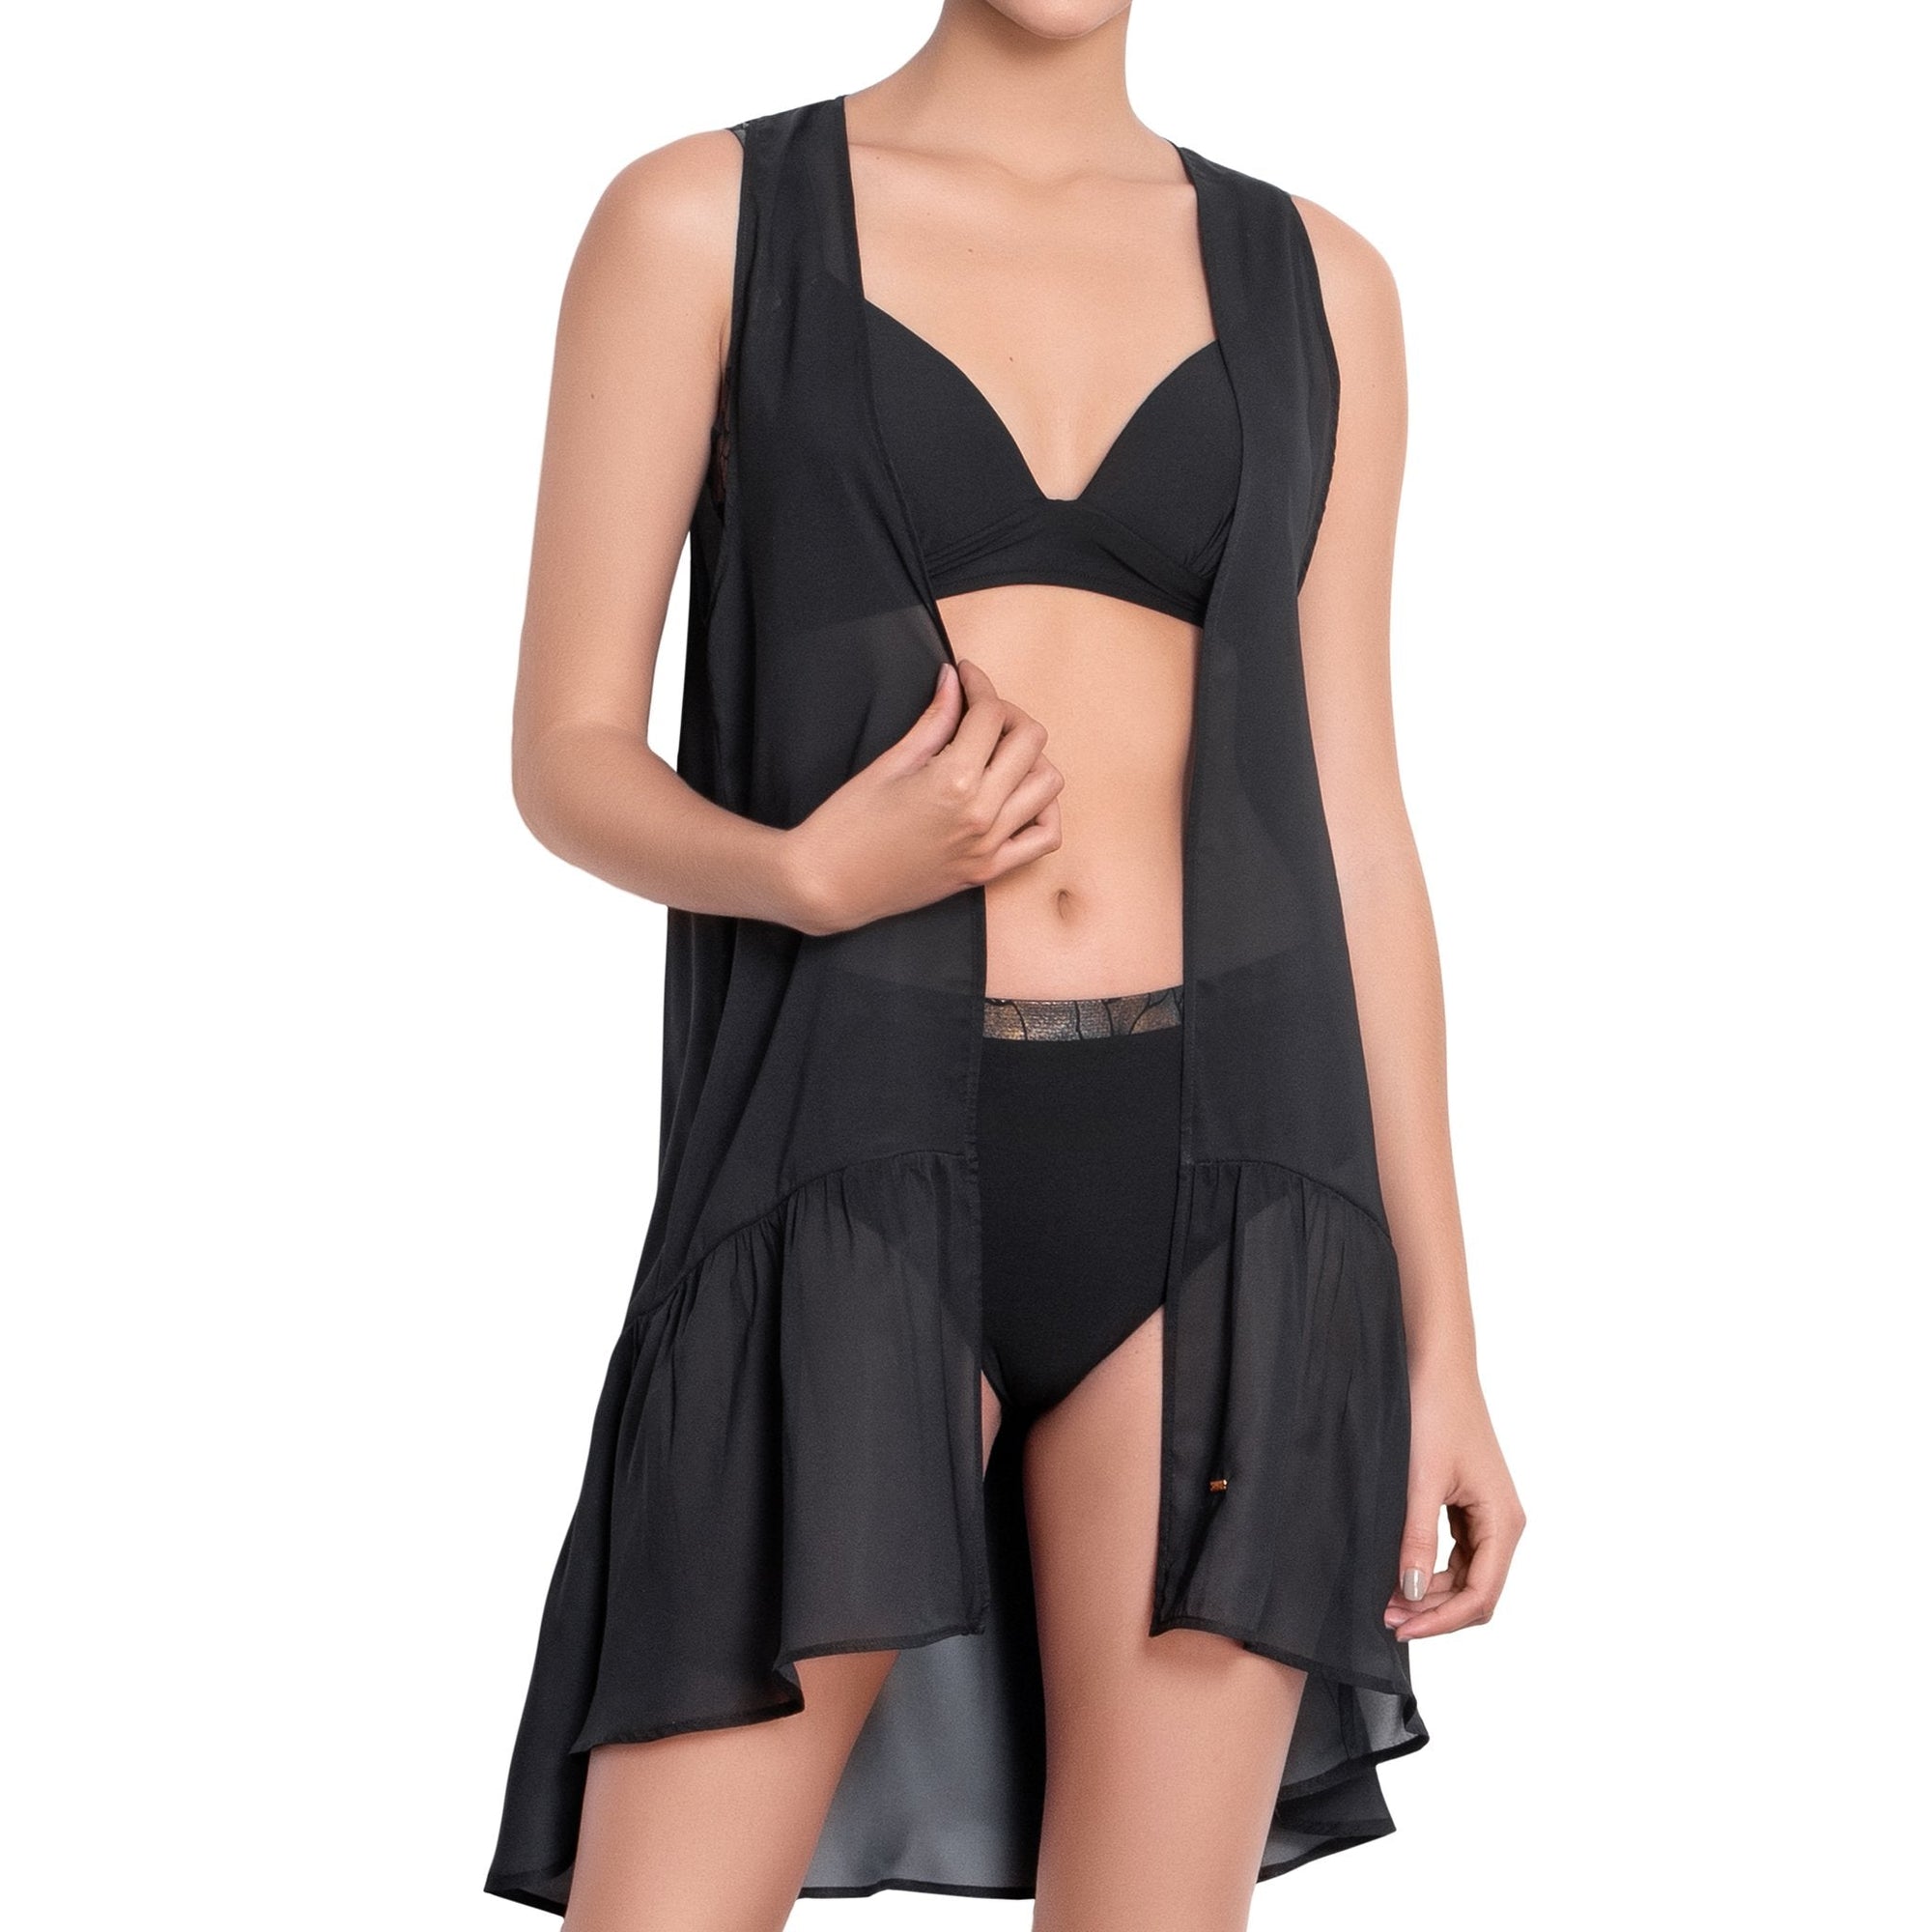 ISABELLE long back dress, black chiffon cover up by ALMA swimwear ‚Äì front view 2